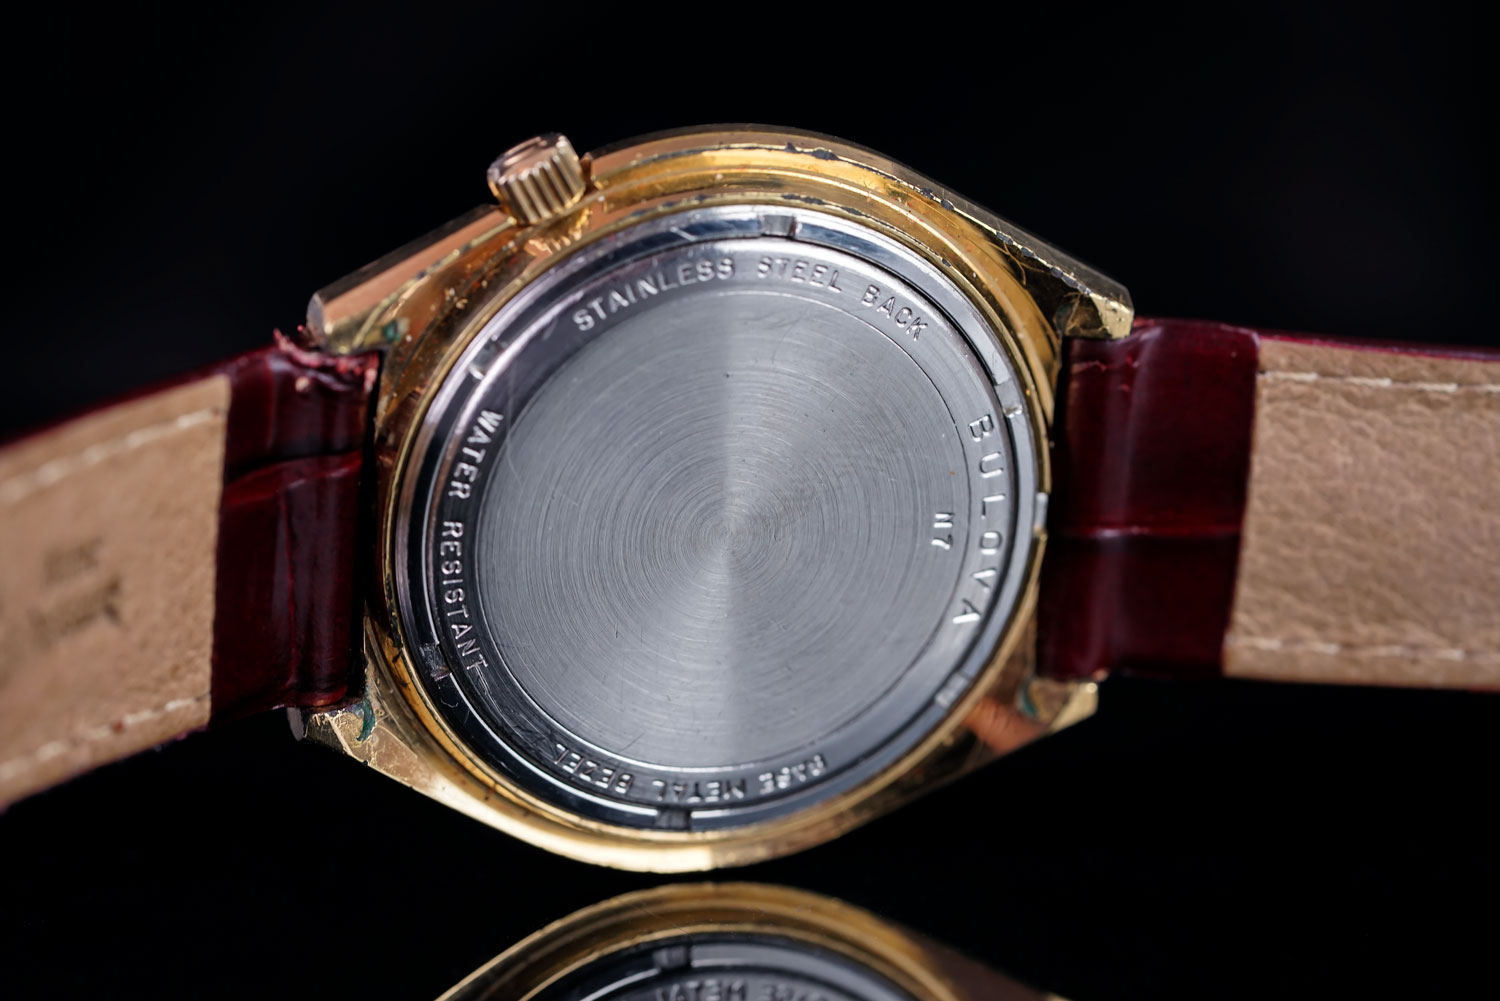 GENTLEMEN'S ACCUTRON BULOVA WRISTWATCH, champagne dial, date at 3 0'clock, 36mm case with - Image 2 of 2